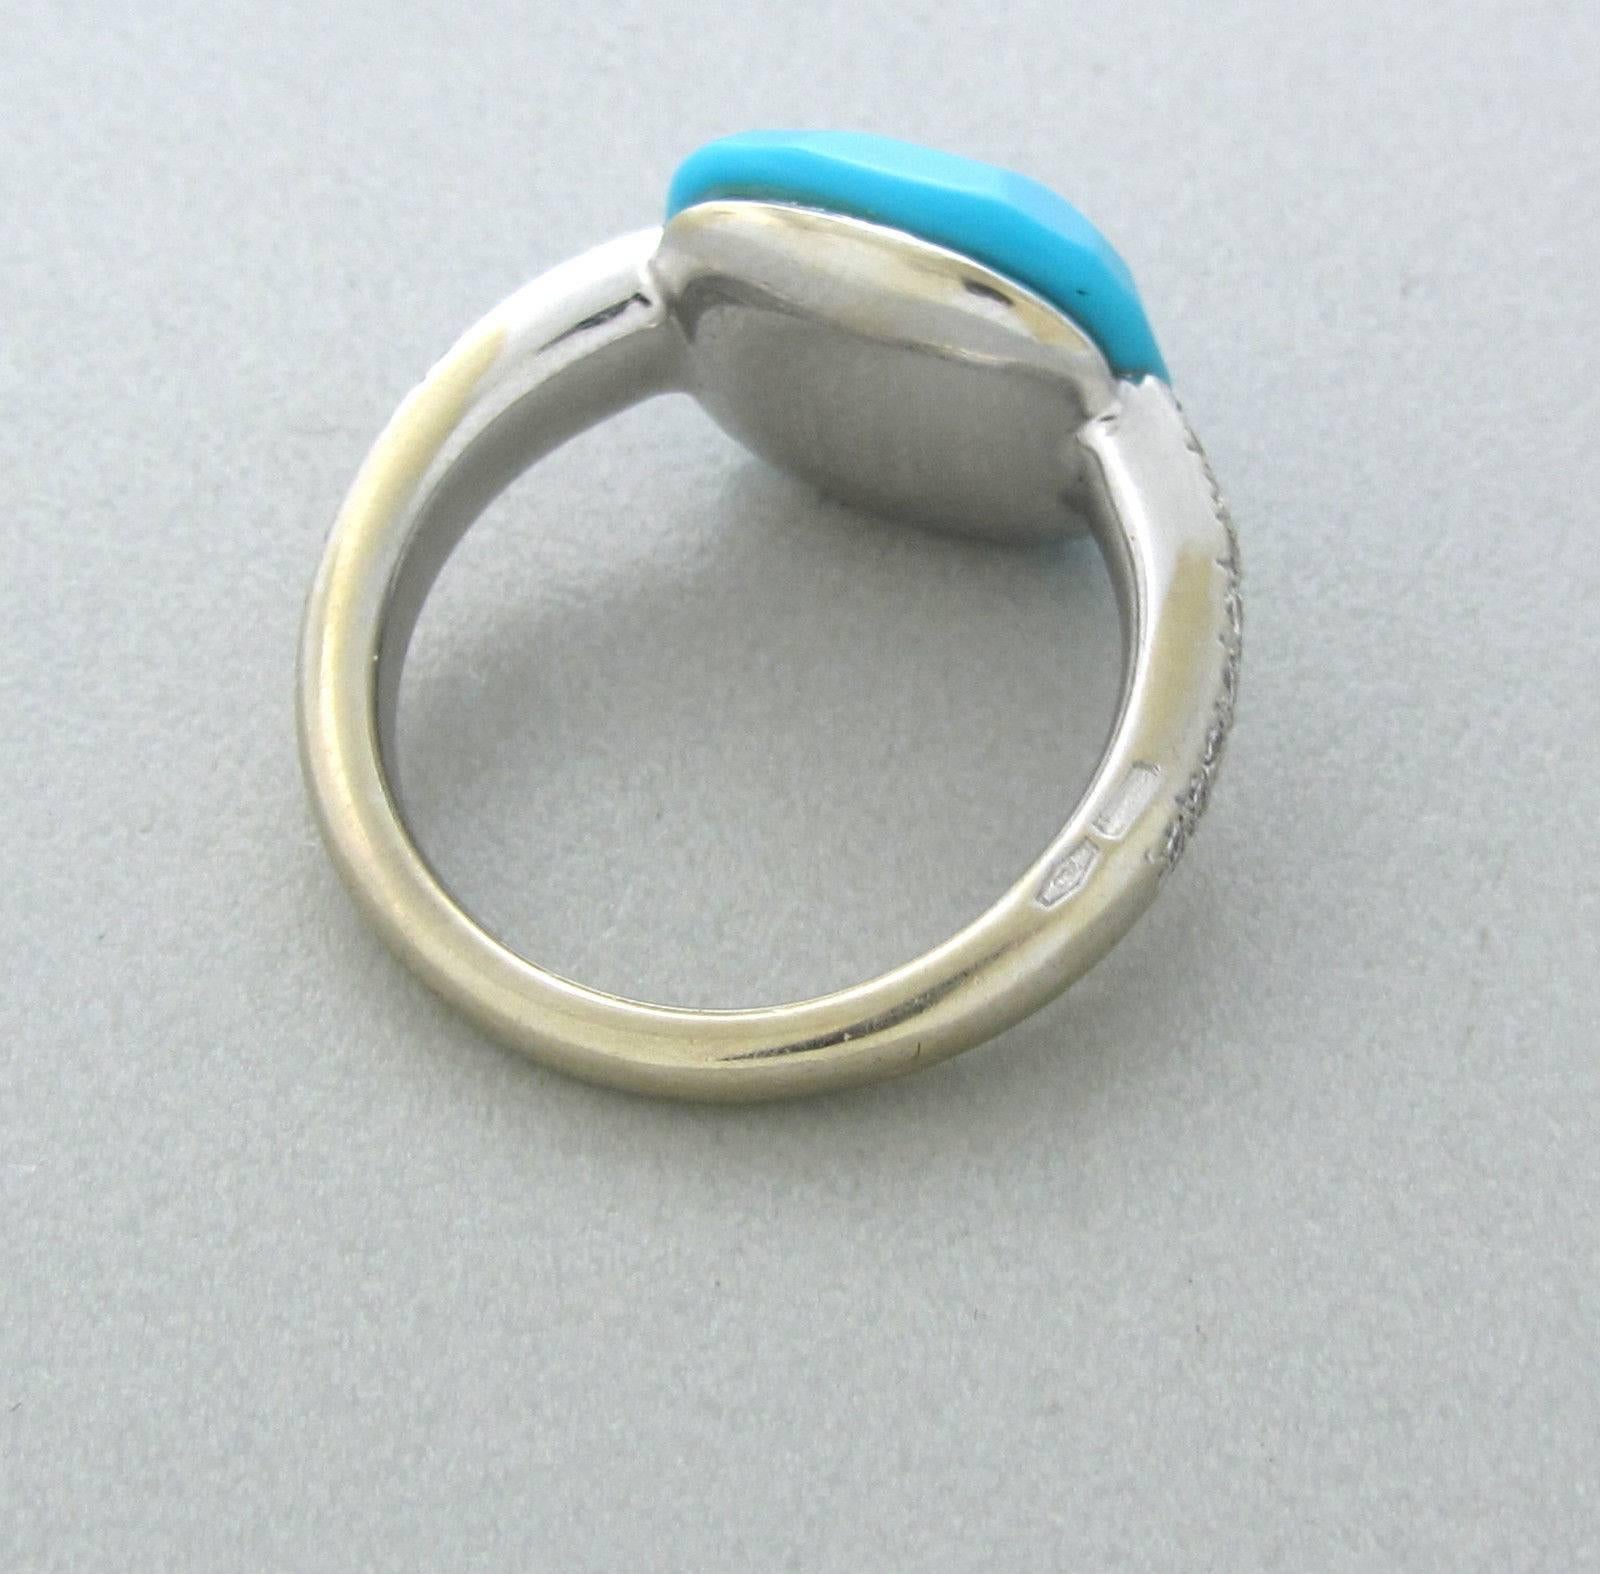 Pomellato 18k white gold ring crafted for the Capri collection. Features turquoise(13mm x 12.7mm) and 0.26ctw of G/VS diamonds. Marked Pomellato 750. Weight- 7.3 grams. Ring size 4.5. Ring retails for $4350